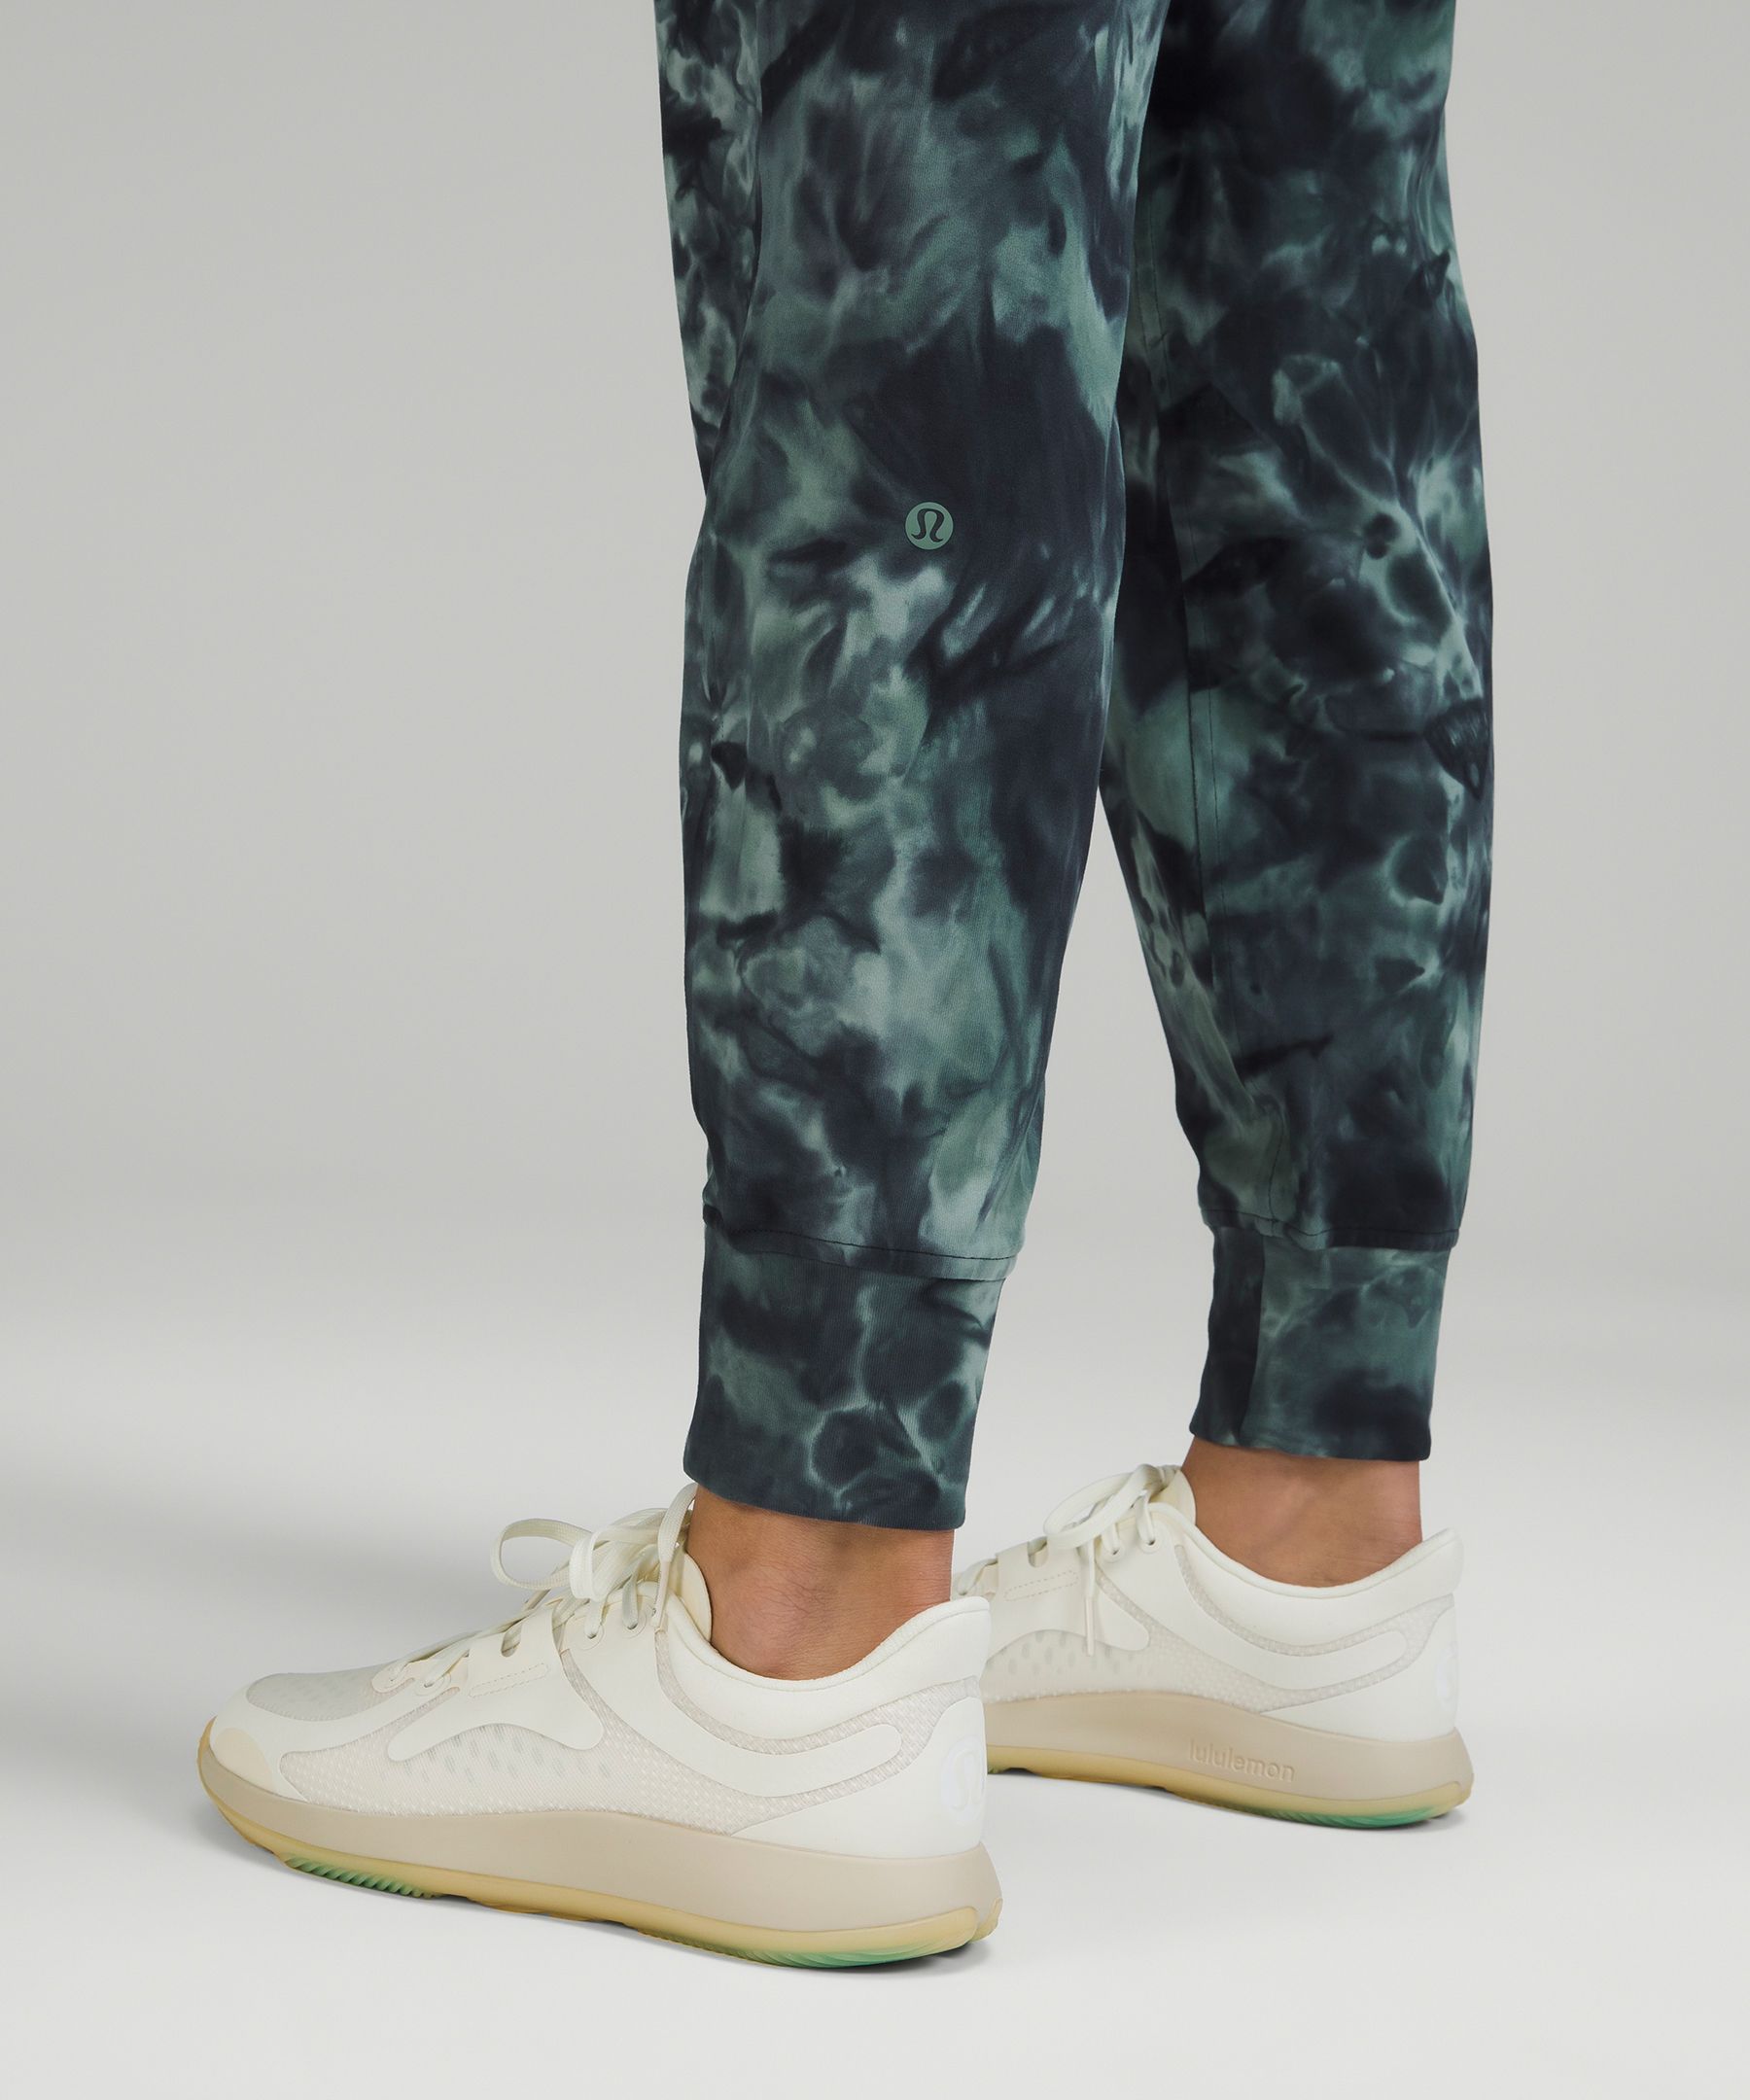 Ill have these in my bi0 under ready to rulu 🍋 joggers! ✨🤍